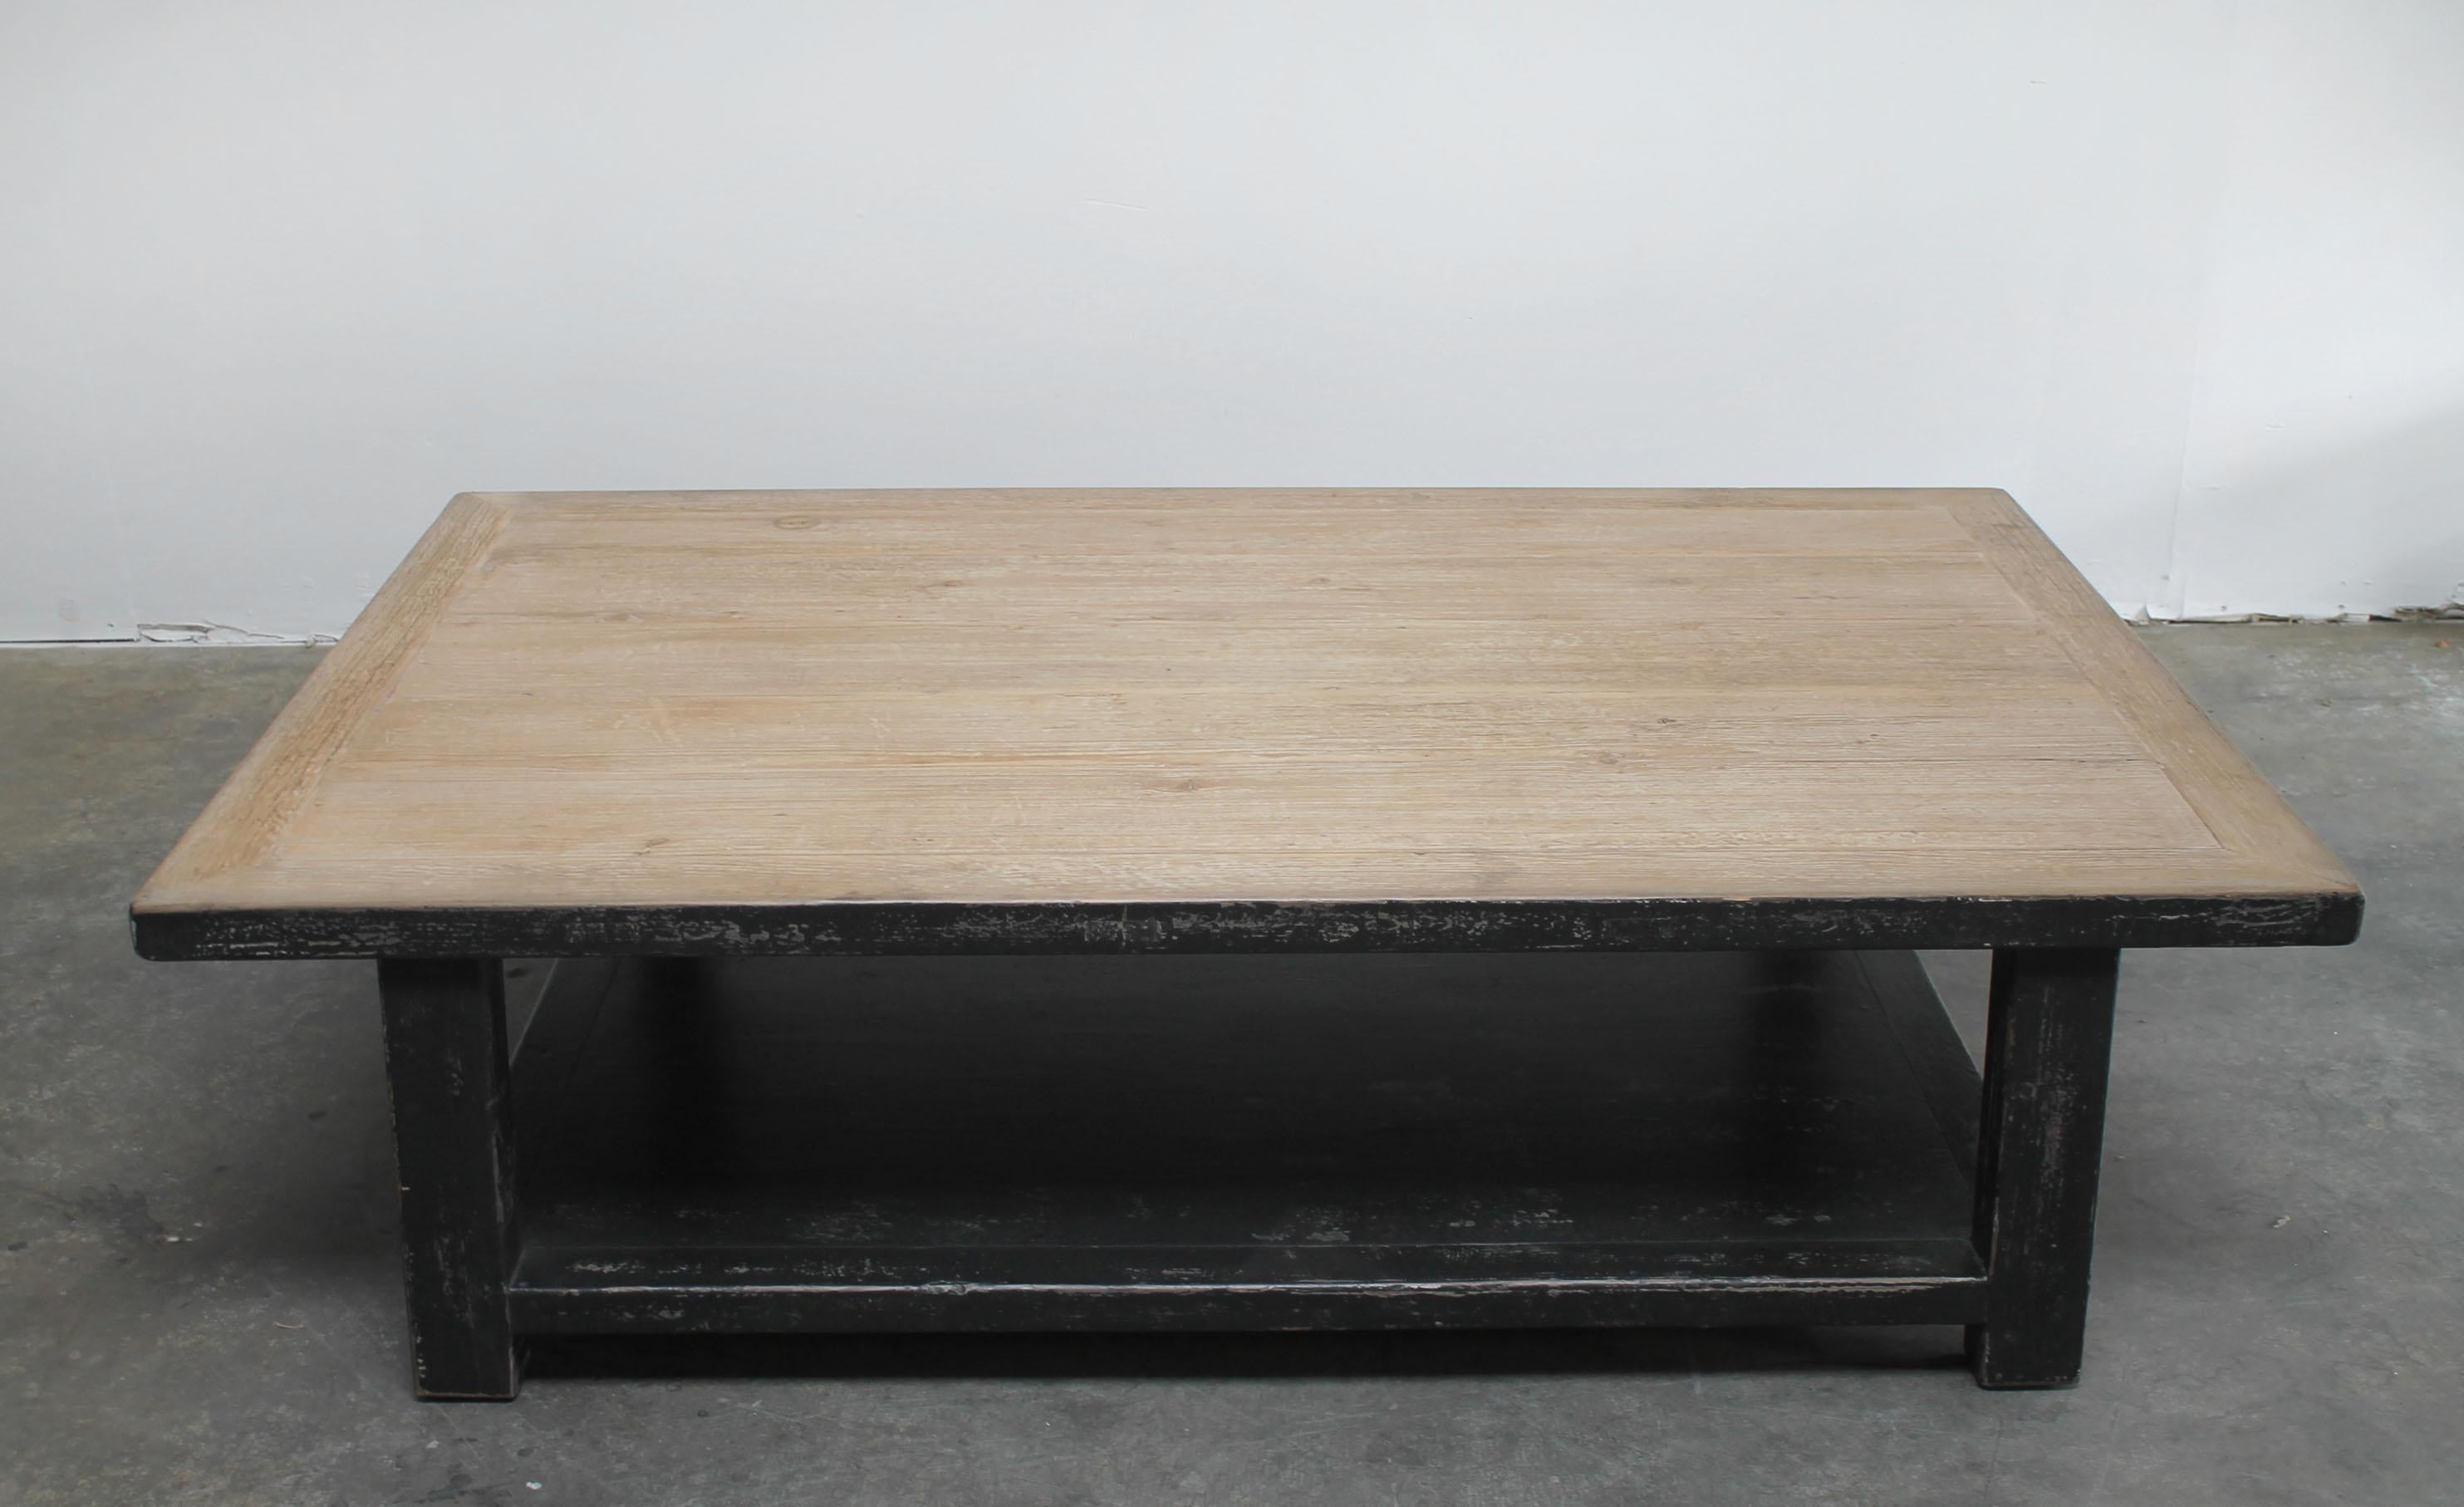 Large reclaimed pine wood coffee table with distressed black finish 
Size: 67 x 43 x 17
The top has a natural reclaimed pine wood finish, each table with have different characteristics, this is part of the reclaimed wood look.
The legs and base